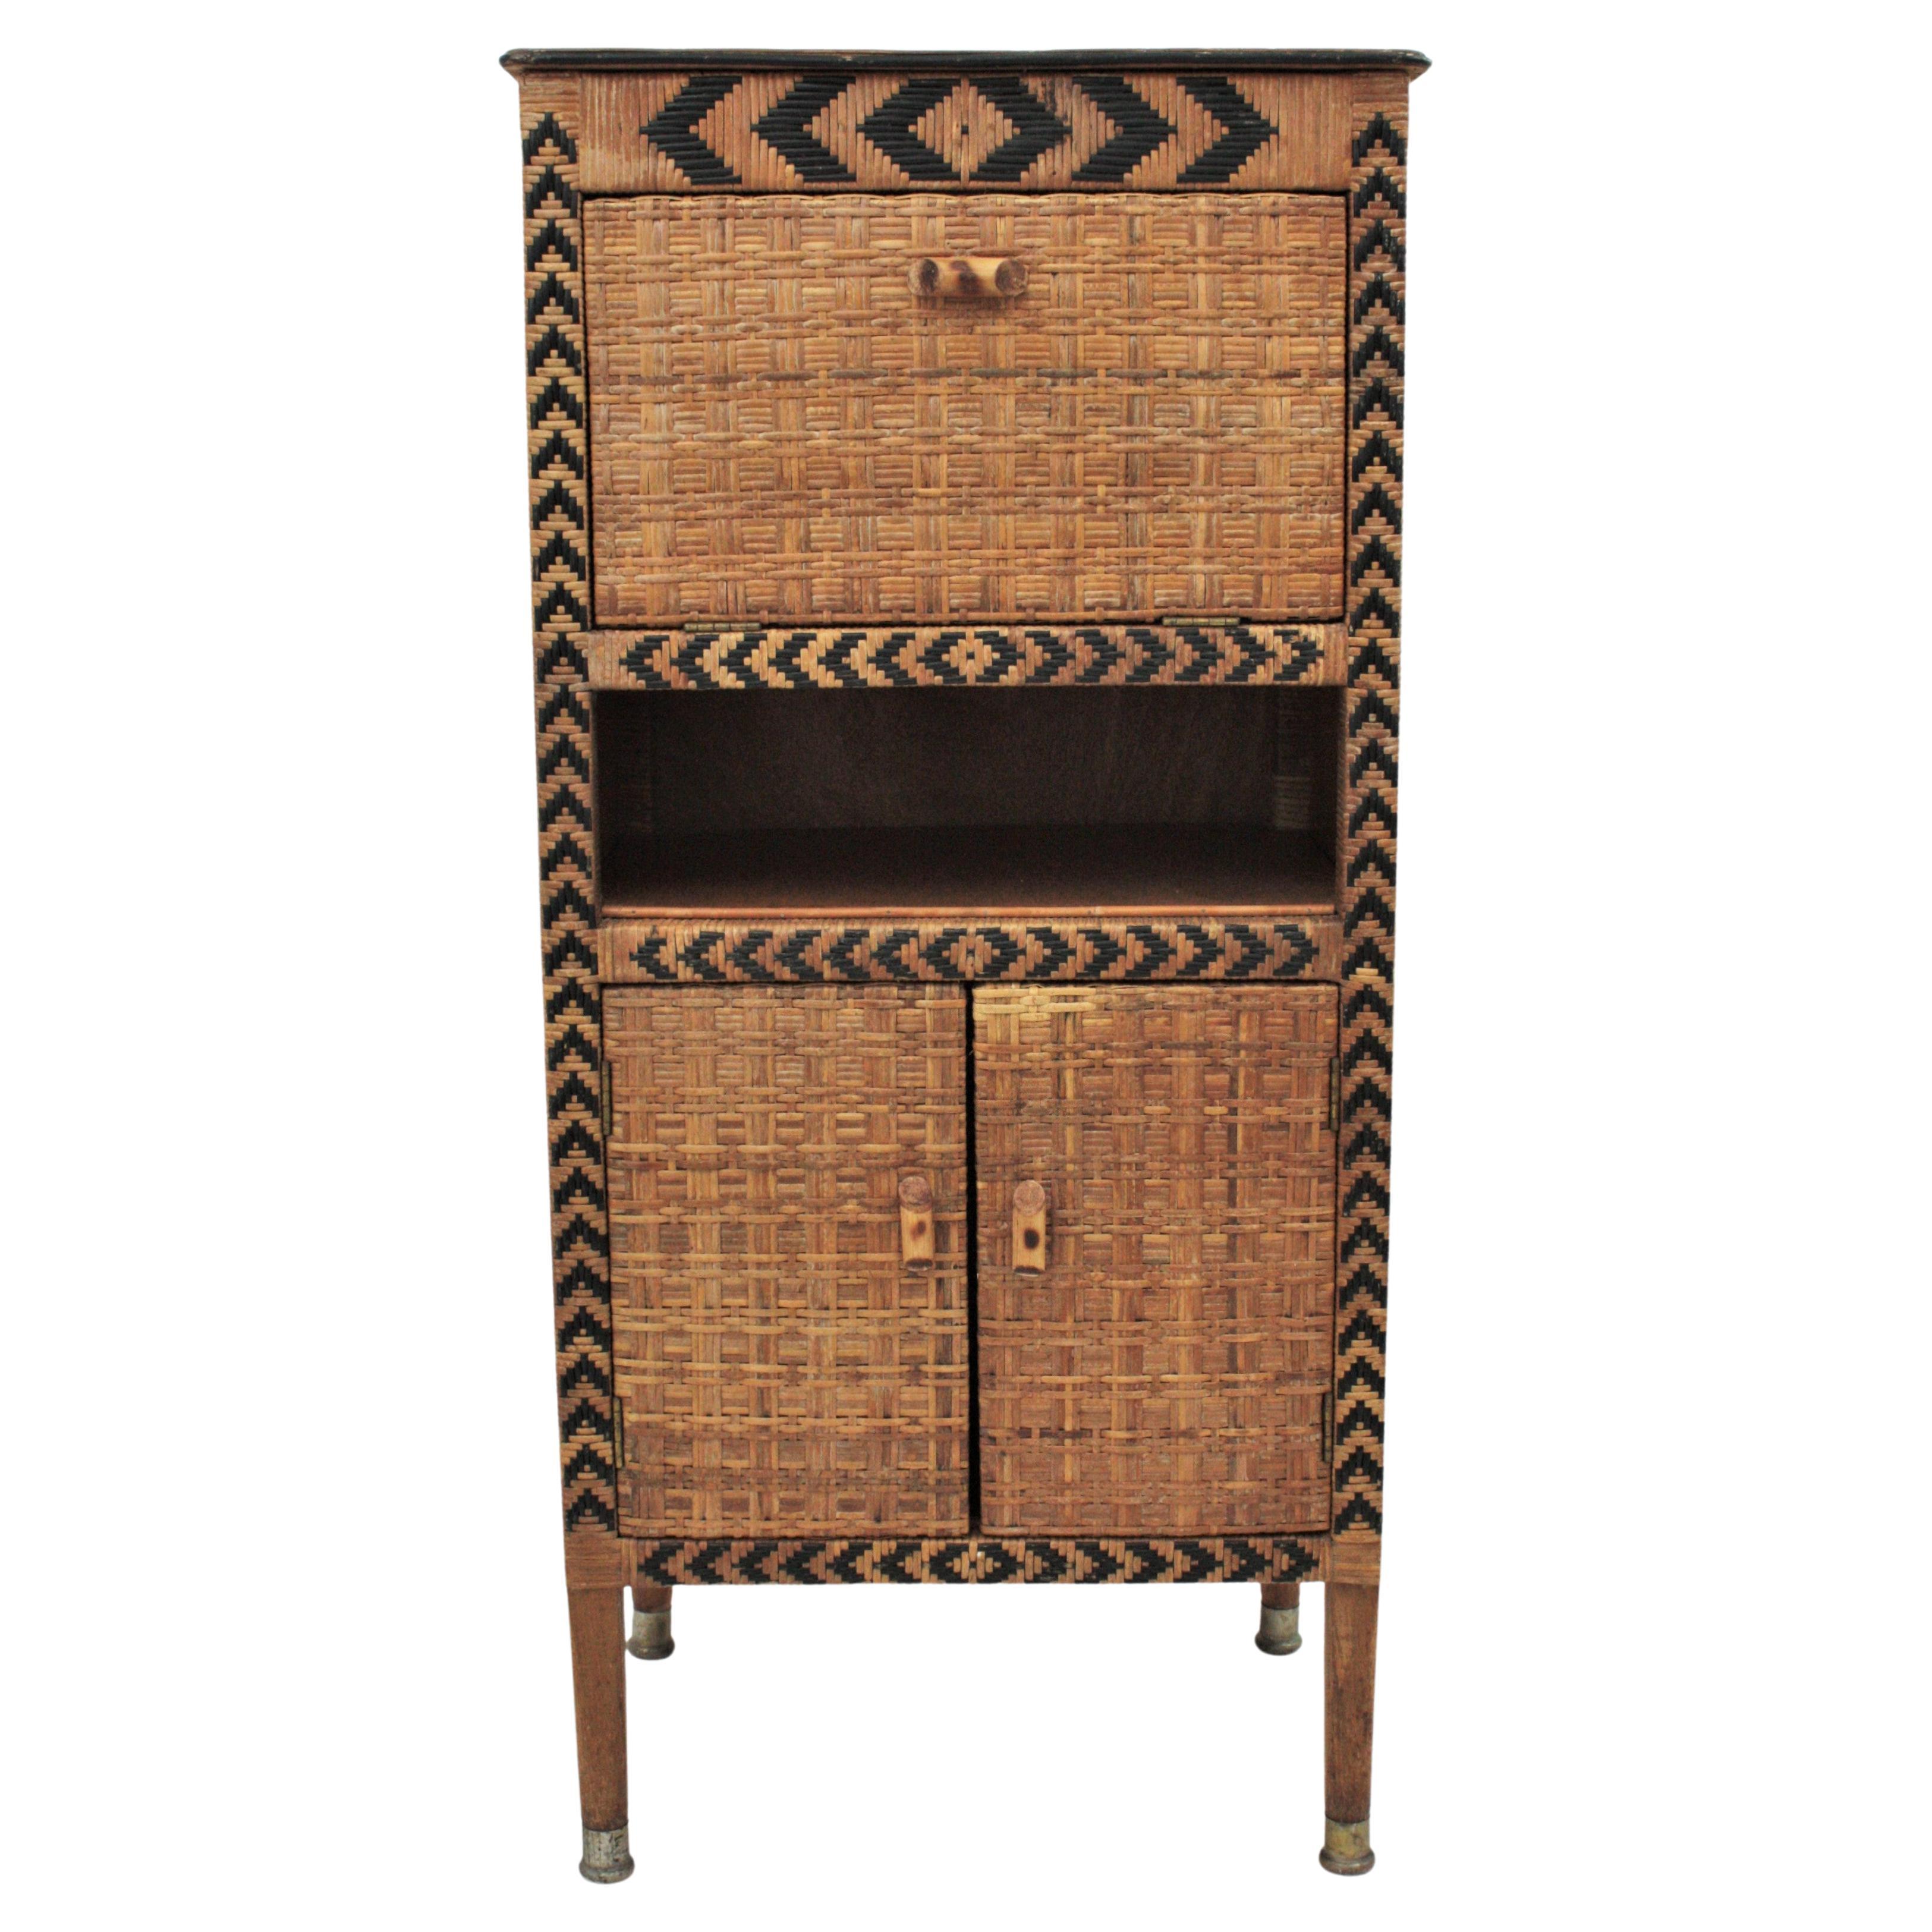 Eye-catching Rattan Victorian Style Tall Cabinet. France, 1940s.
This rattan cabinet features a wooden structure upholstered with woven rattan in two tones. It has three doors and one shelf and a black pattern decorating the front part.
It has an